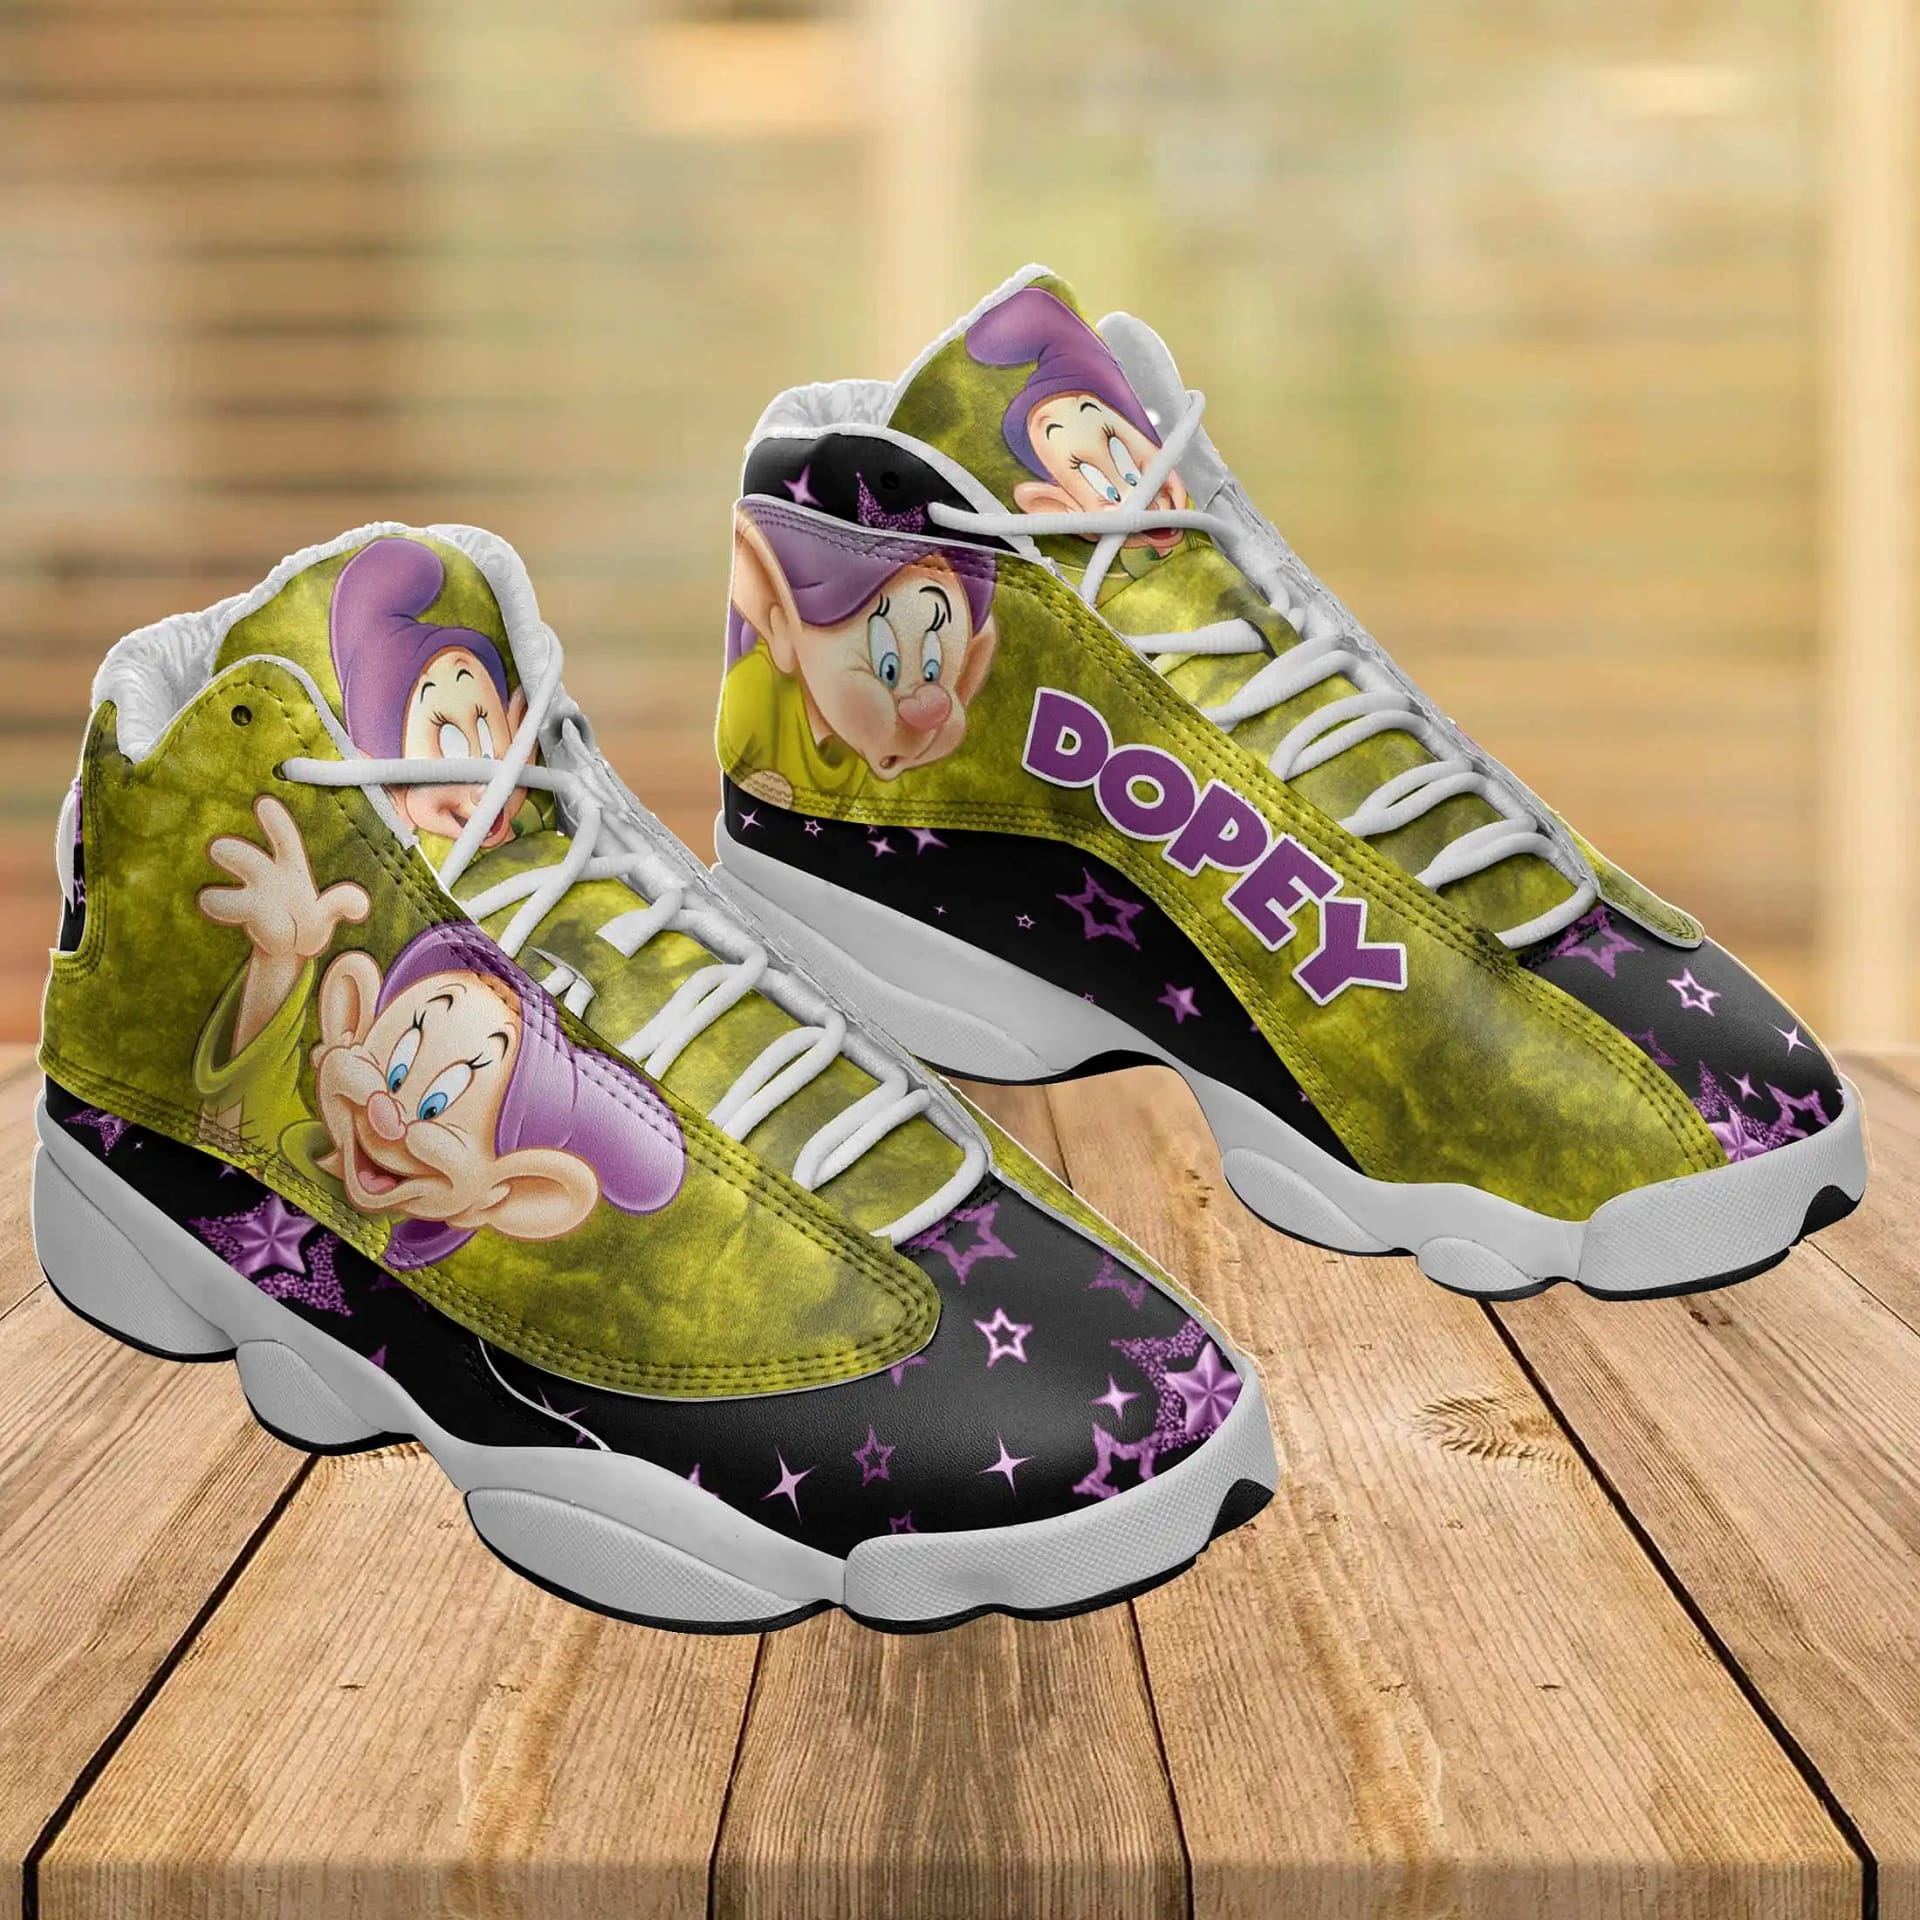 Snow White And The Seven Dwarfs Dopey Air Jordan Shoes